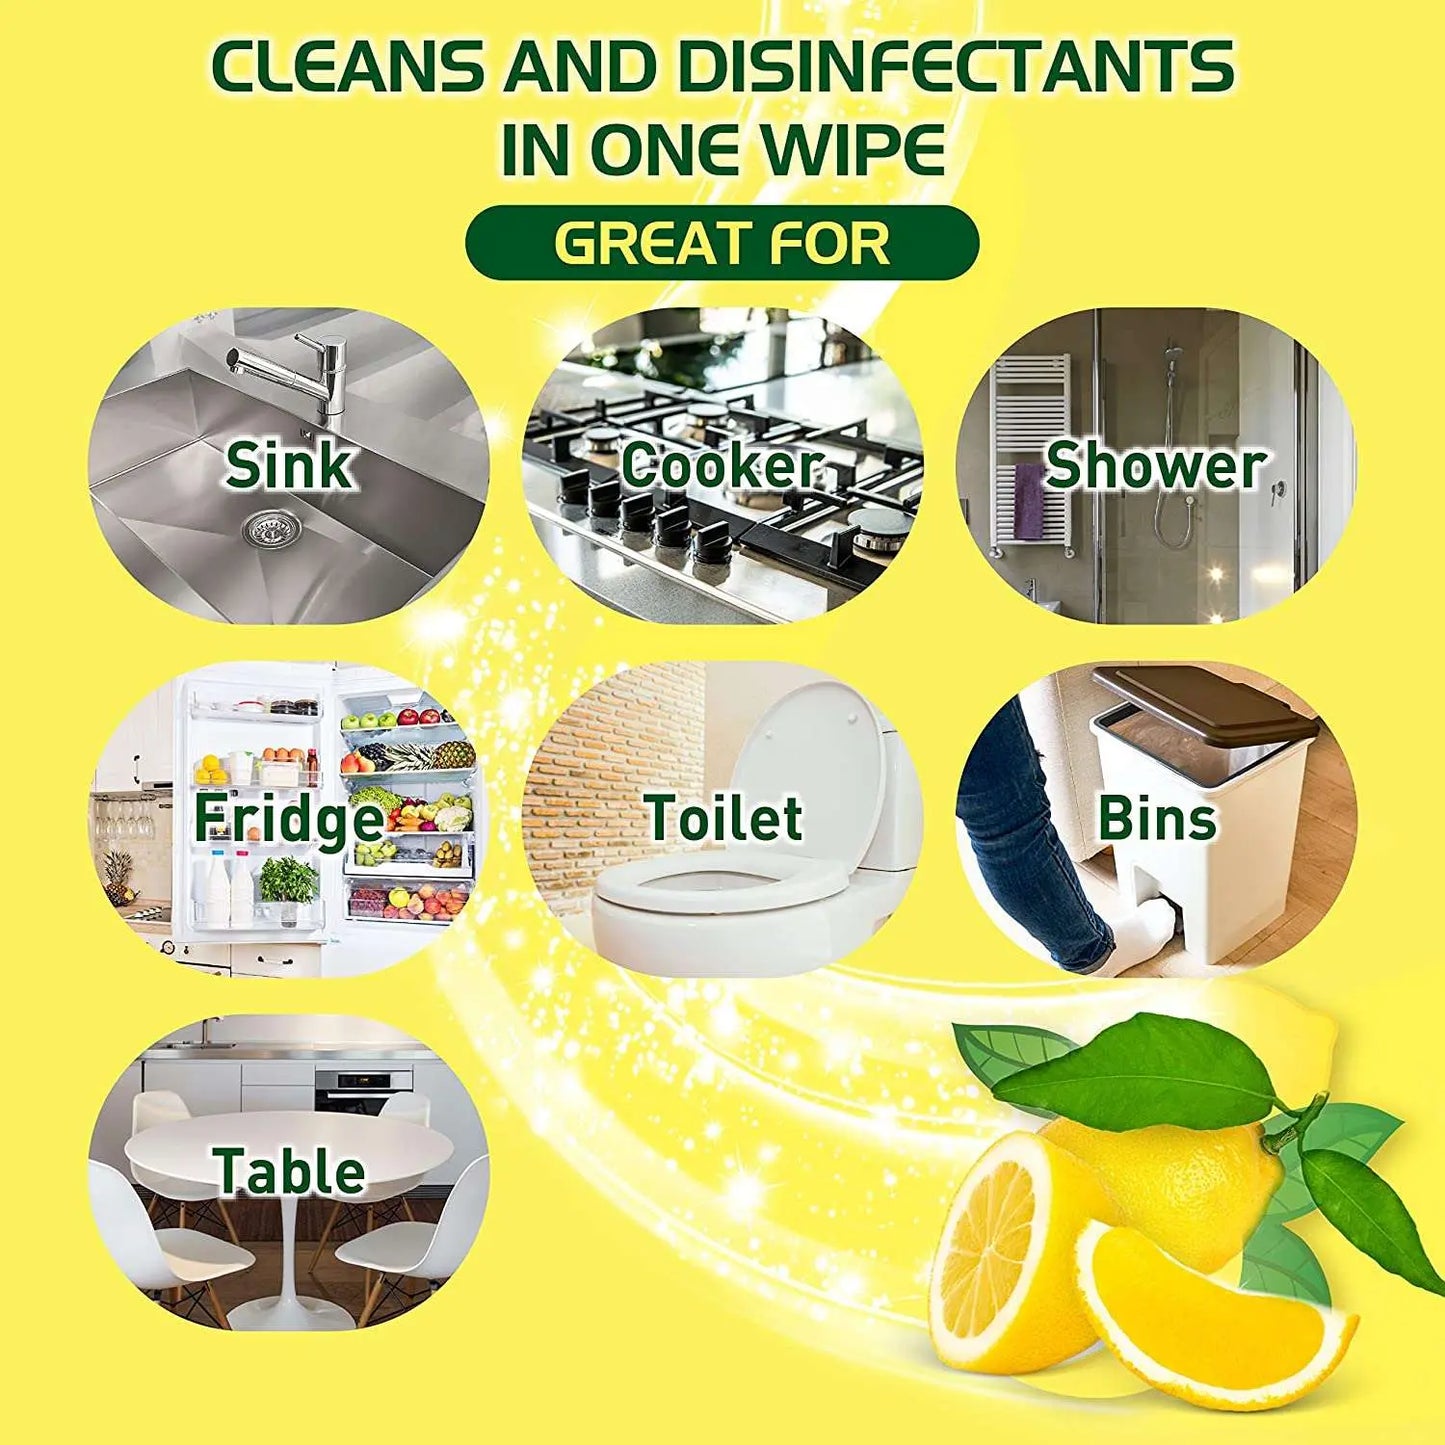 Vim Multi-Purpose Disinfectant-Sanitizer Wipes - 99.99% Virus and Bacteria Elimination - Fresh Citrus Scent - 75 Count - Cleans and Disinfects In One Wipes MK Smith's Shop